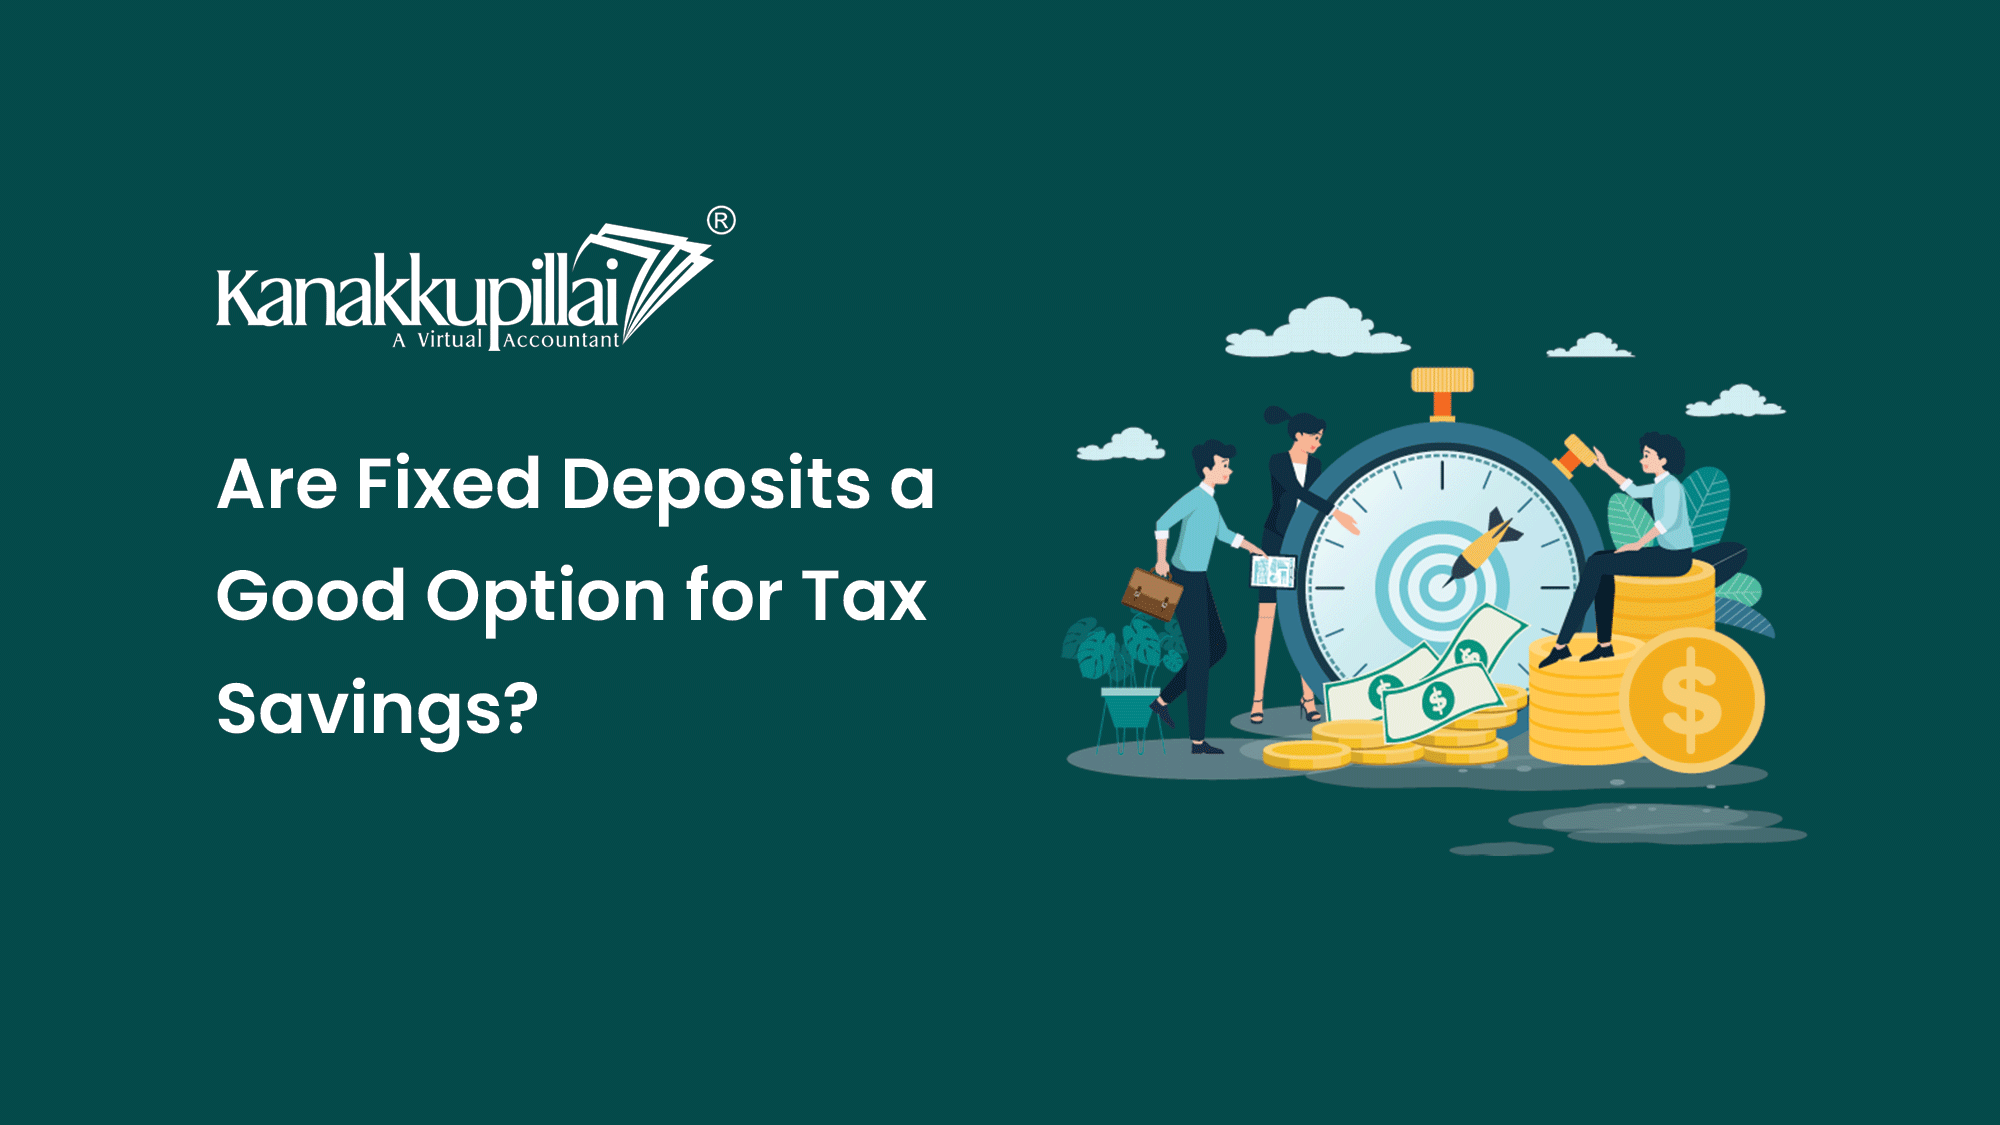 Are Fixed Deposits a Good Option for Tax Savings?